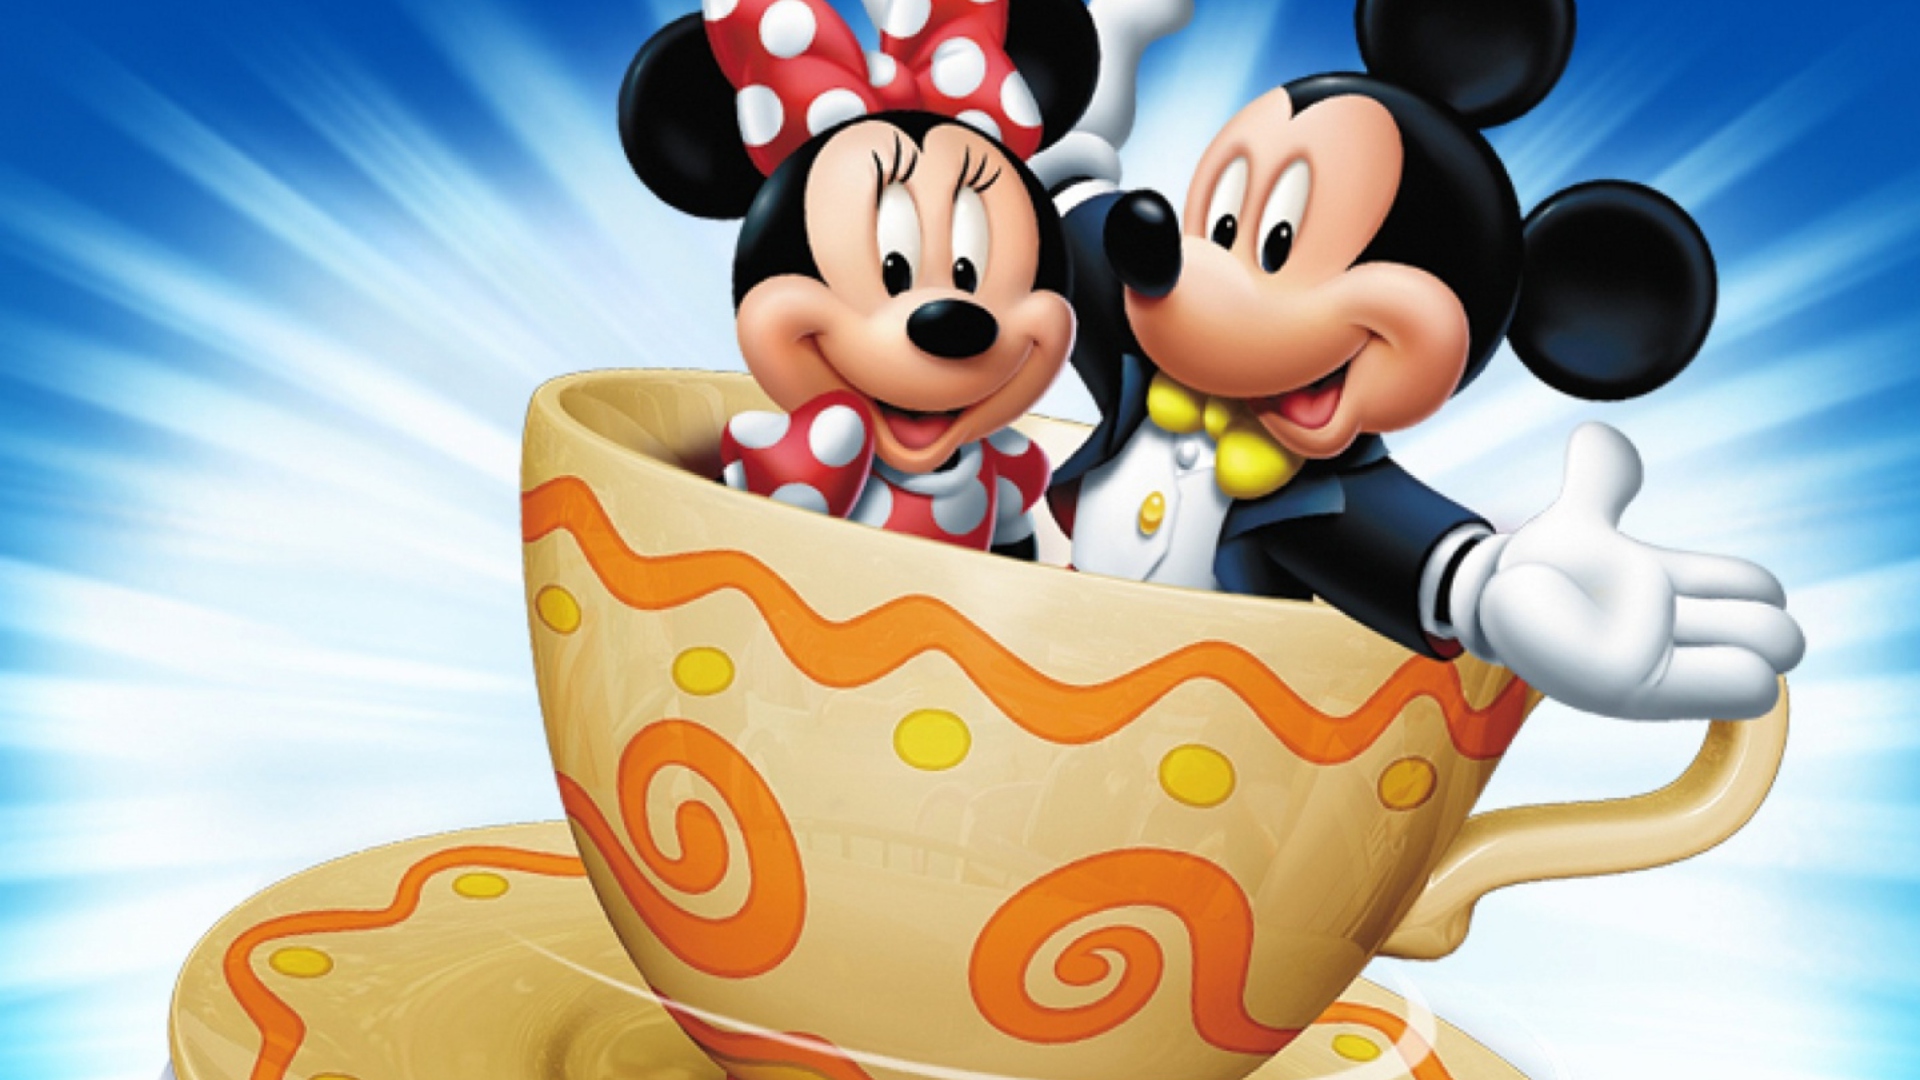 Mickey And Minnie Mouse In Cup wallpaper 1920x1080